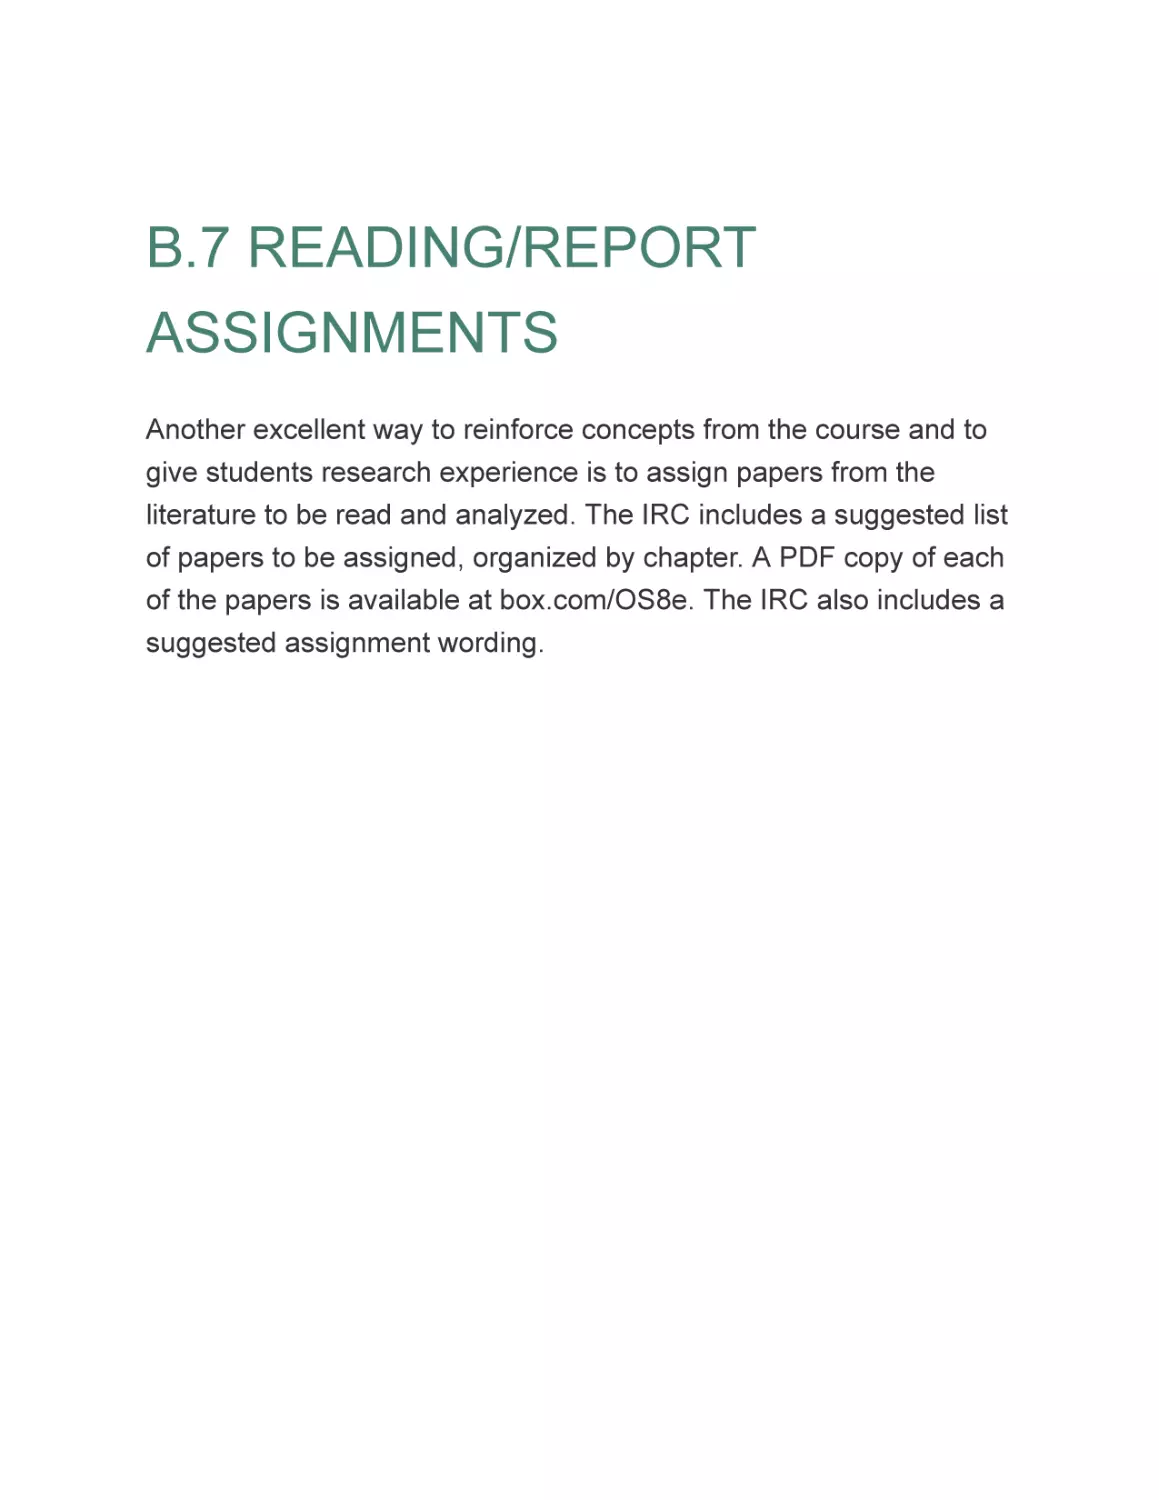 B.7 READING/REPORT ASSIGNMENTS